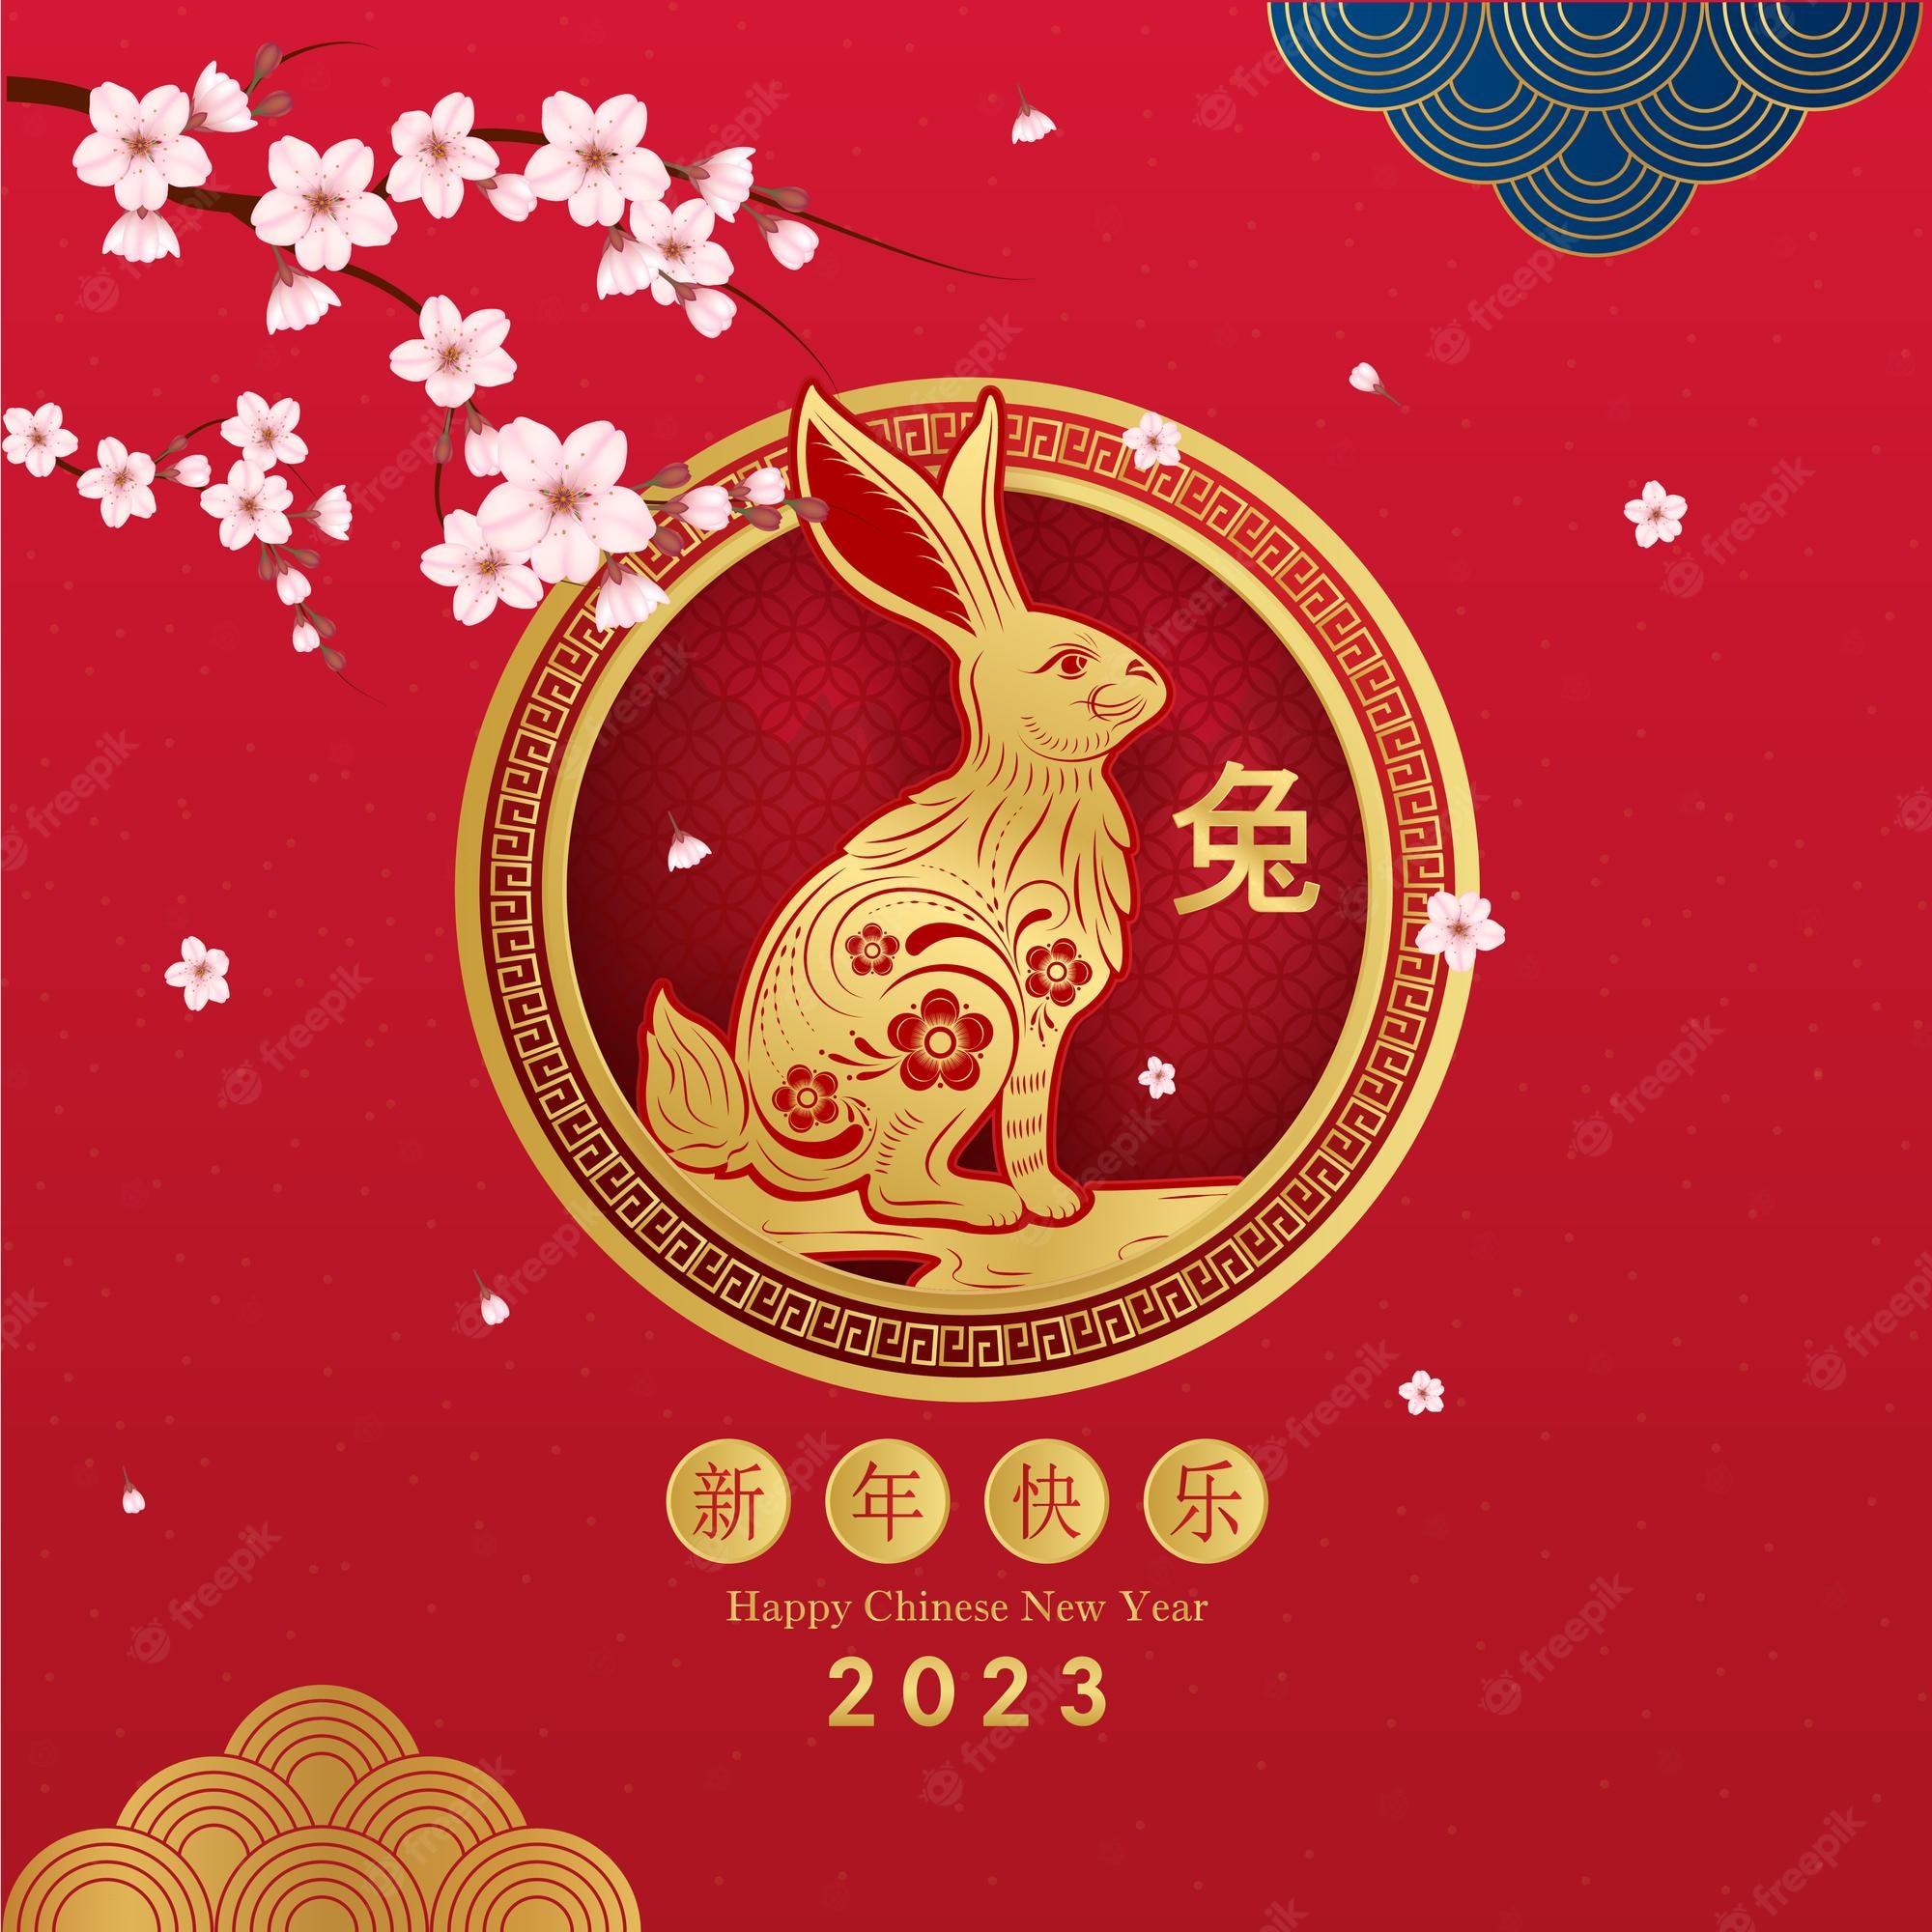 Premium Vector. Chinese new year 2023 card, rabbit zodiac sign on red background. rabbit and cherry blossom